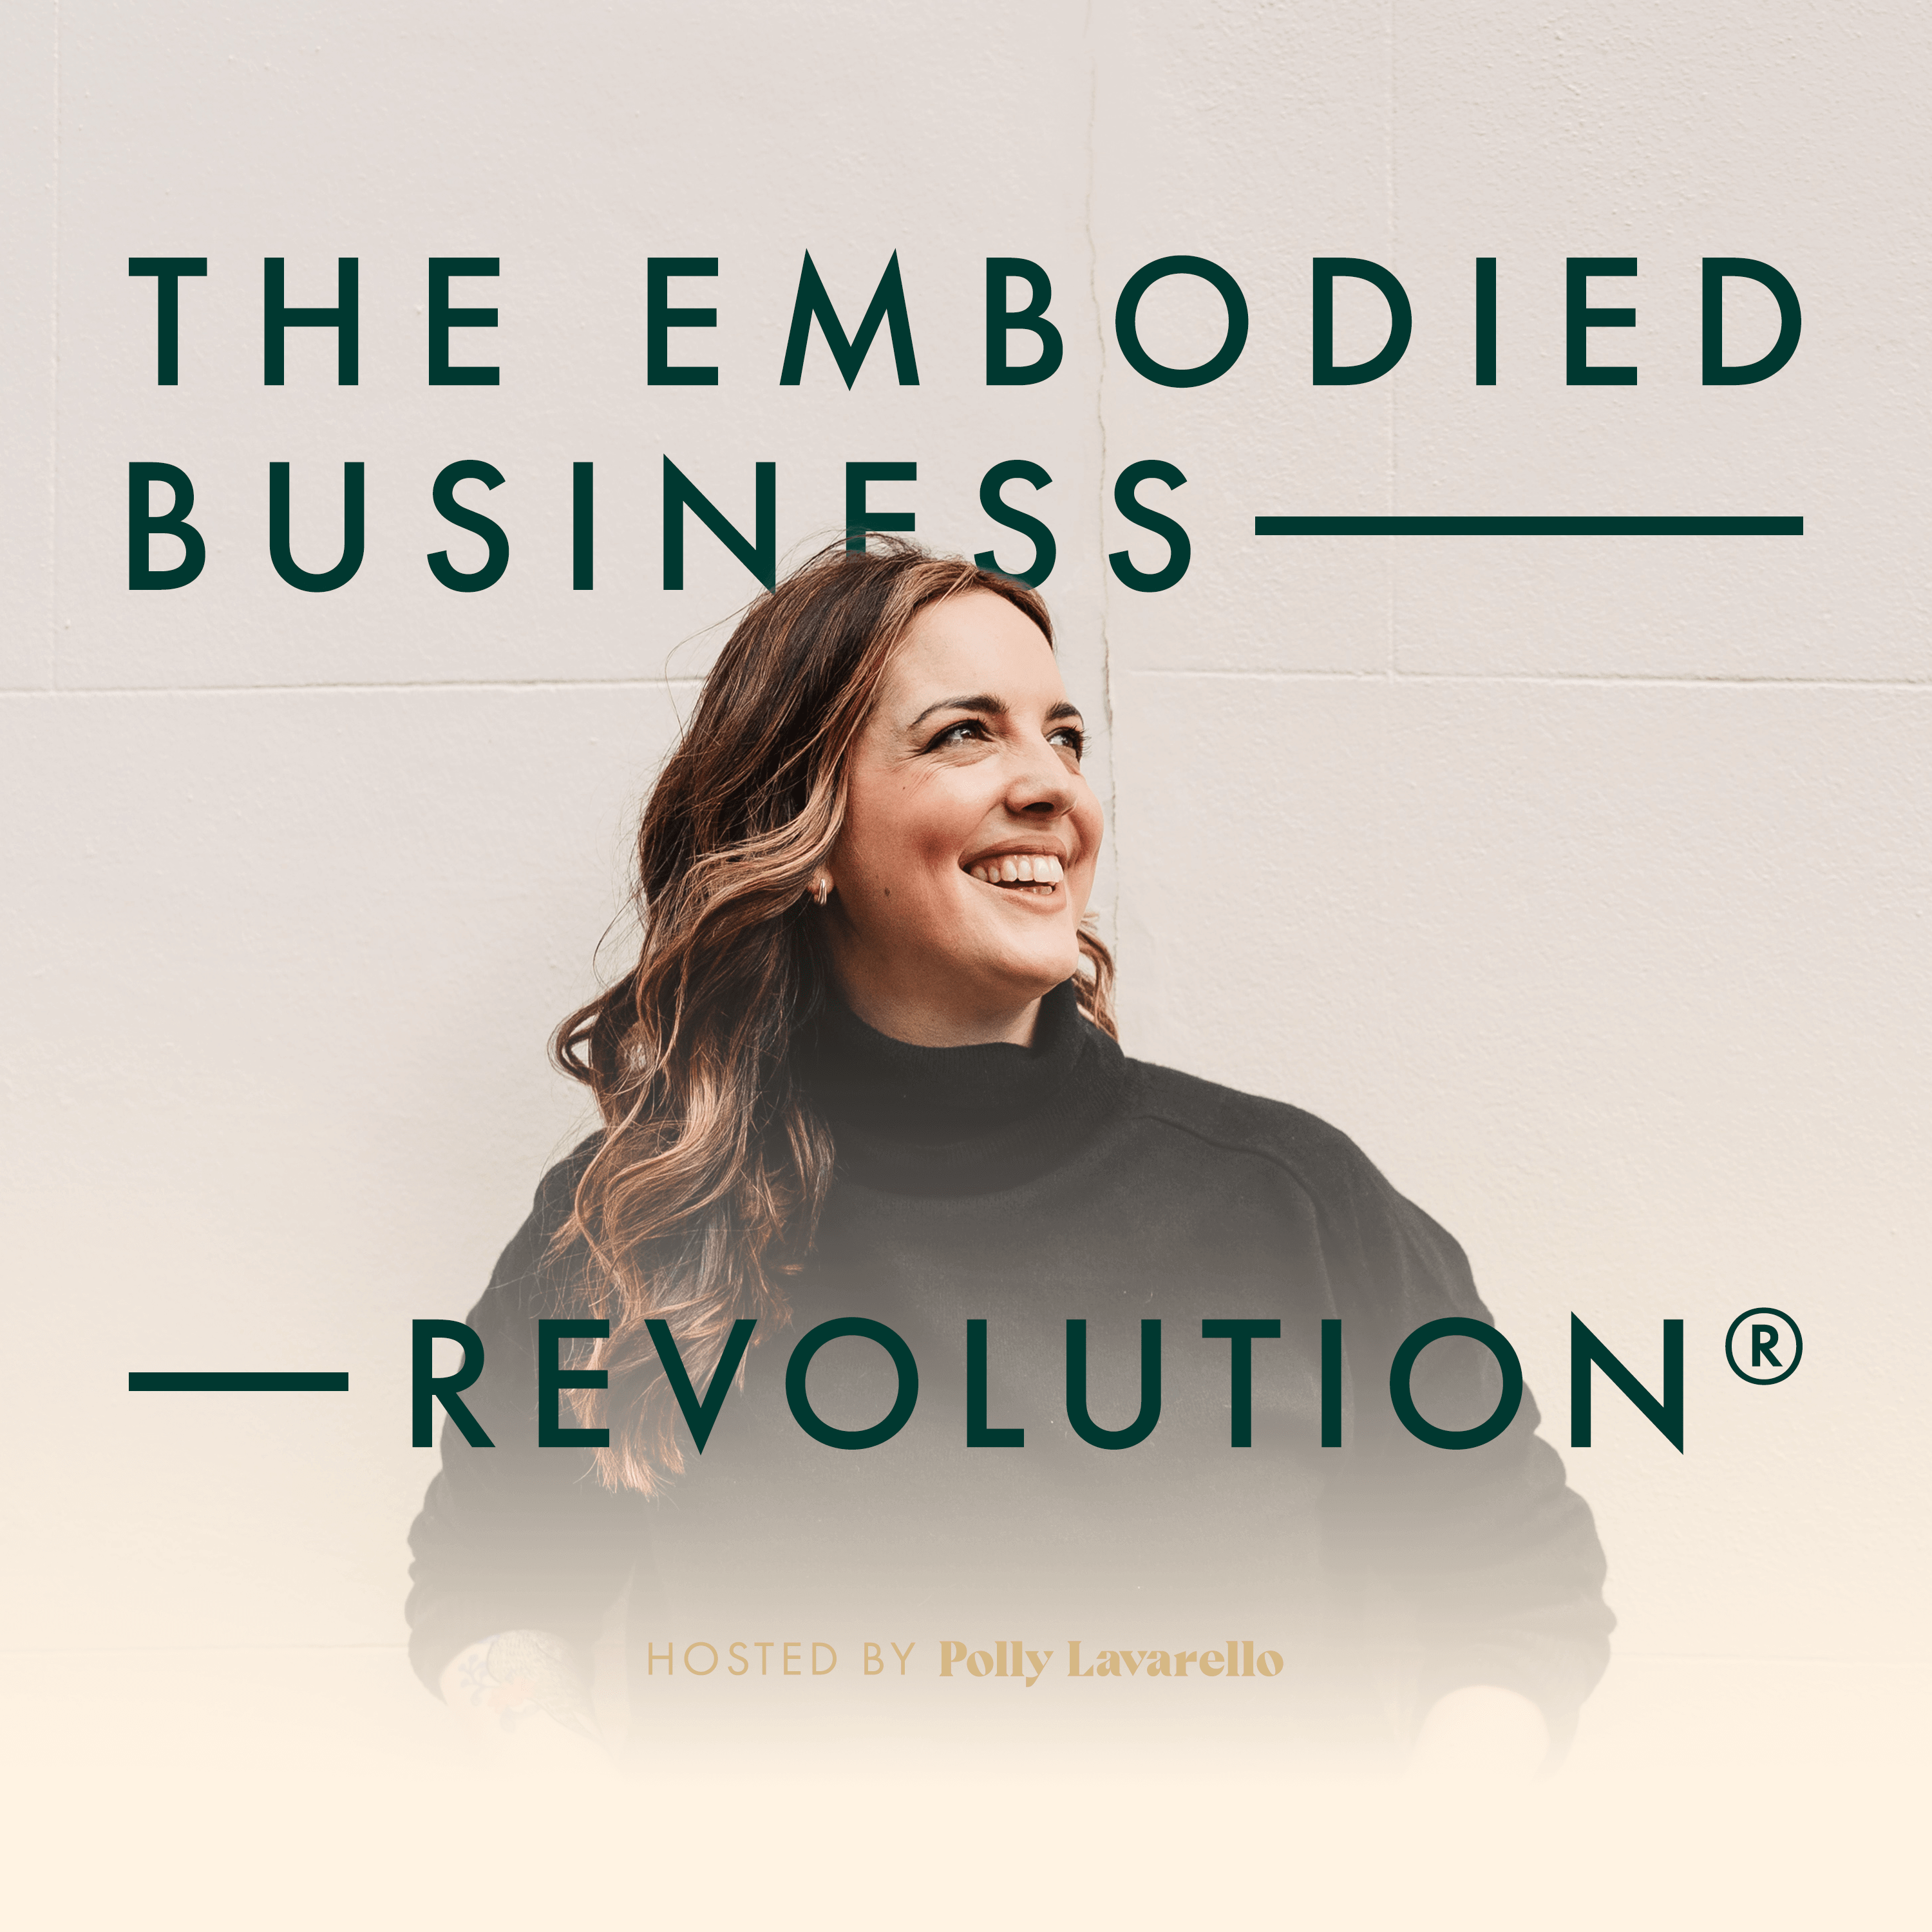 Artwork for The Embodied Business Revolution ®